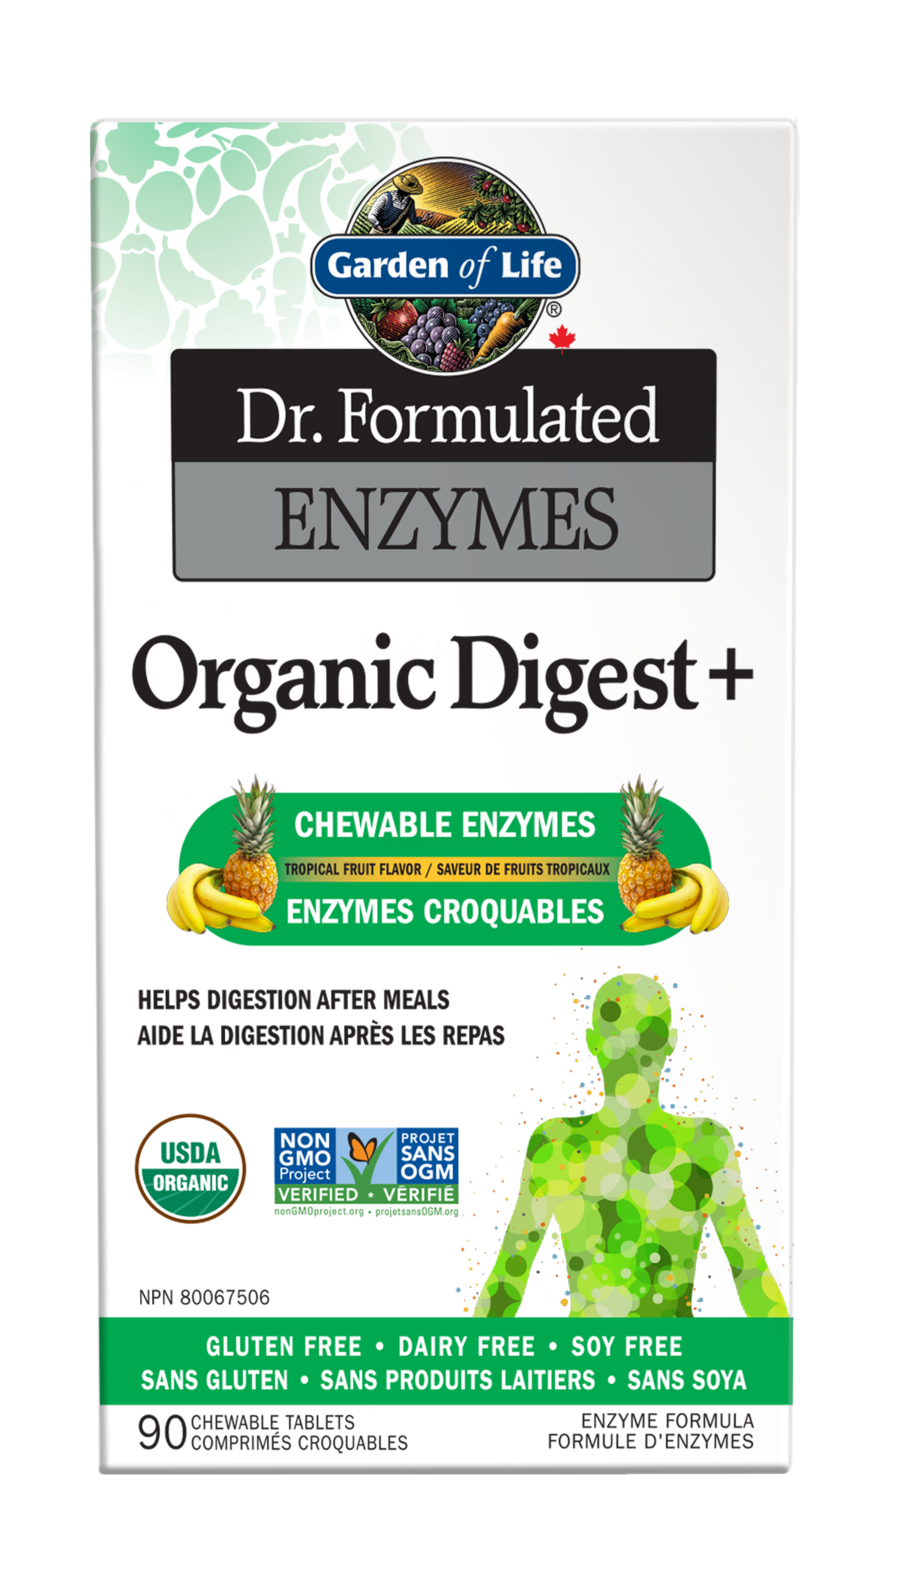 Garden of Life - Chewable Enzymes